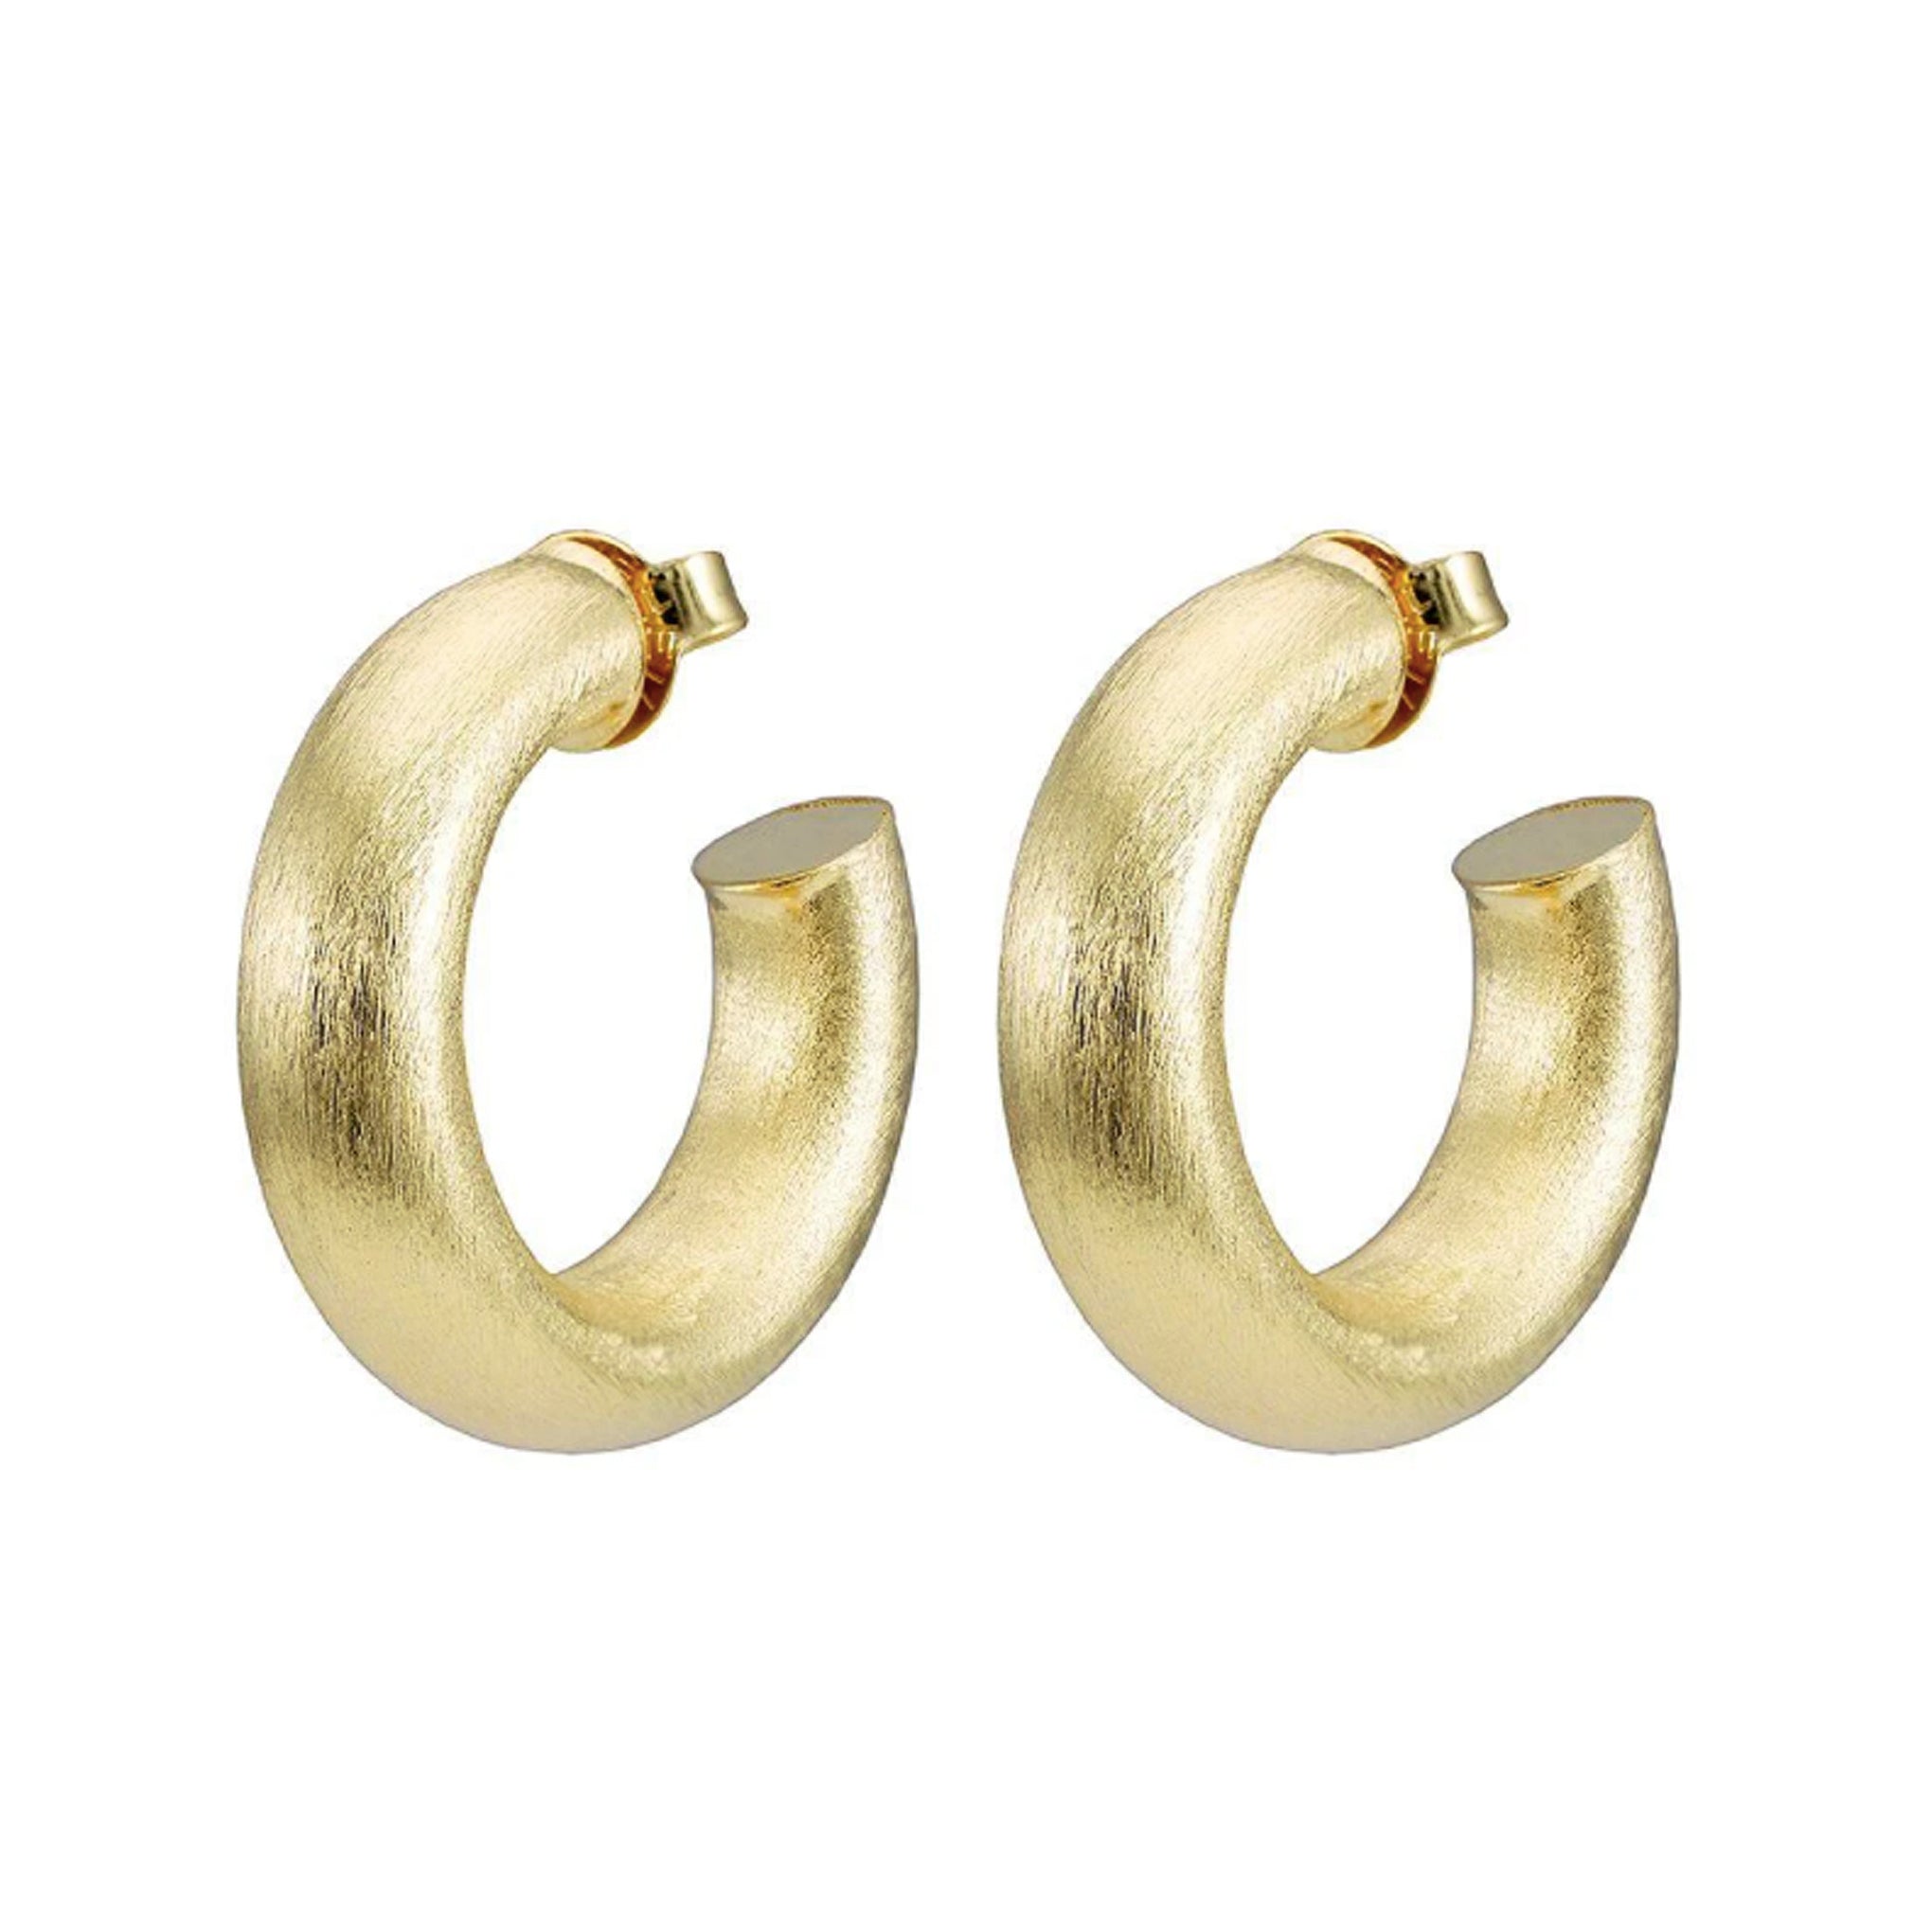 Sheila Fajl Thick Small Chantal Hoop Earrings in Brushed Gold Plated